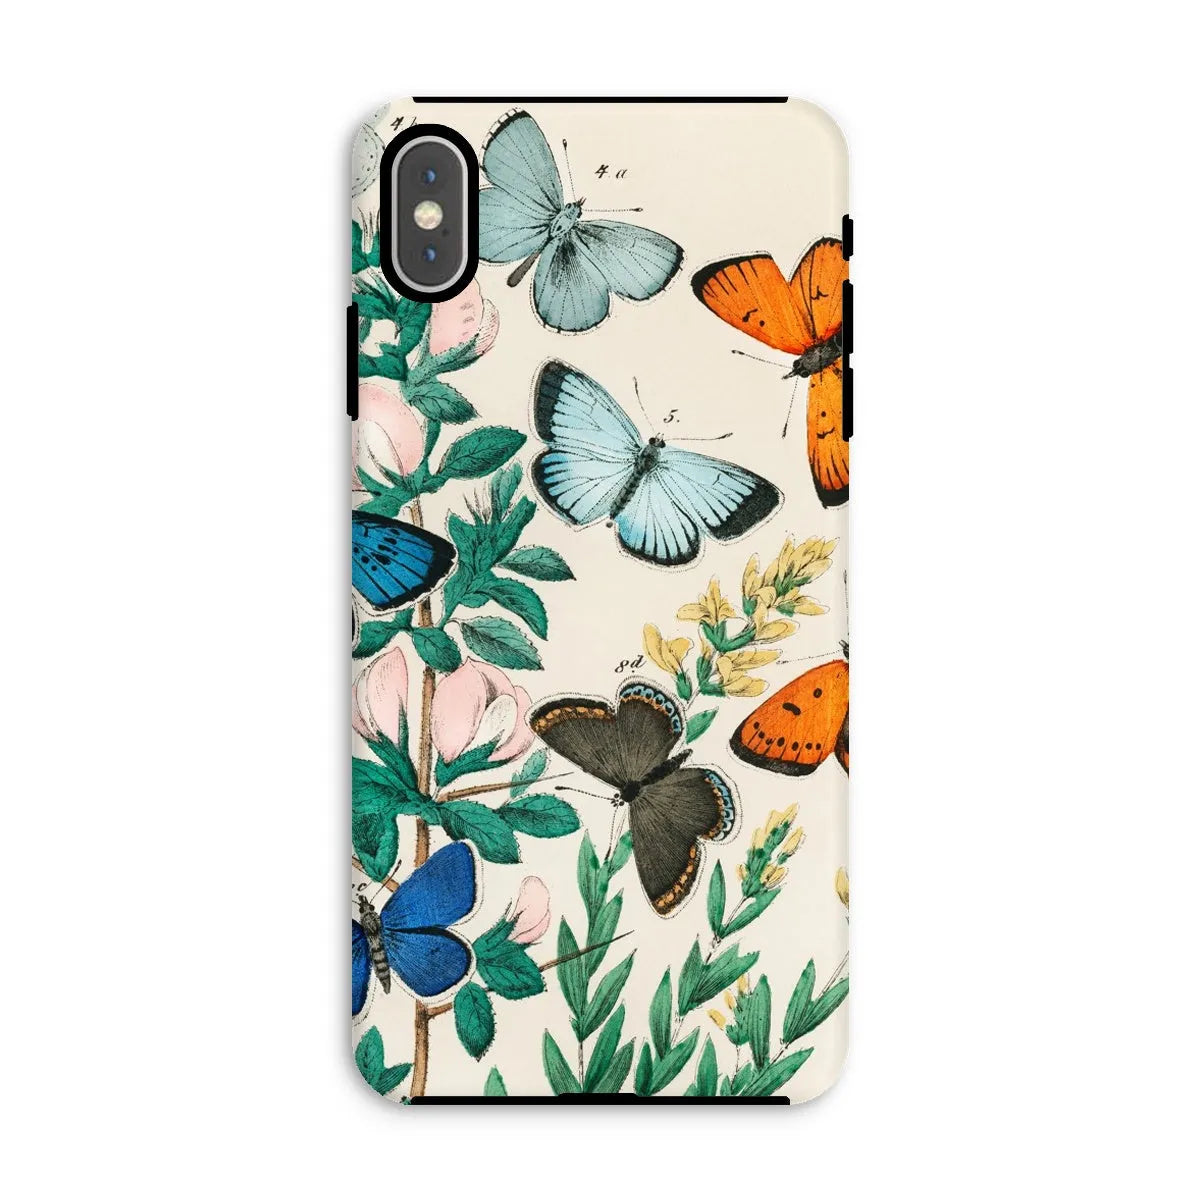 Another Butterfly Aesthetic Art Phone Case - William Forsell Kirby - Iphone Xs Max / Matte - Mobile Phone Cases